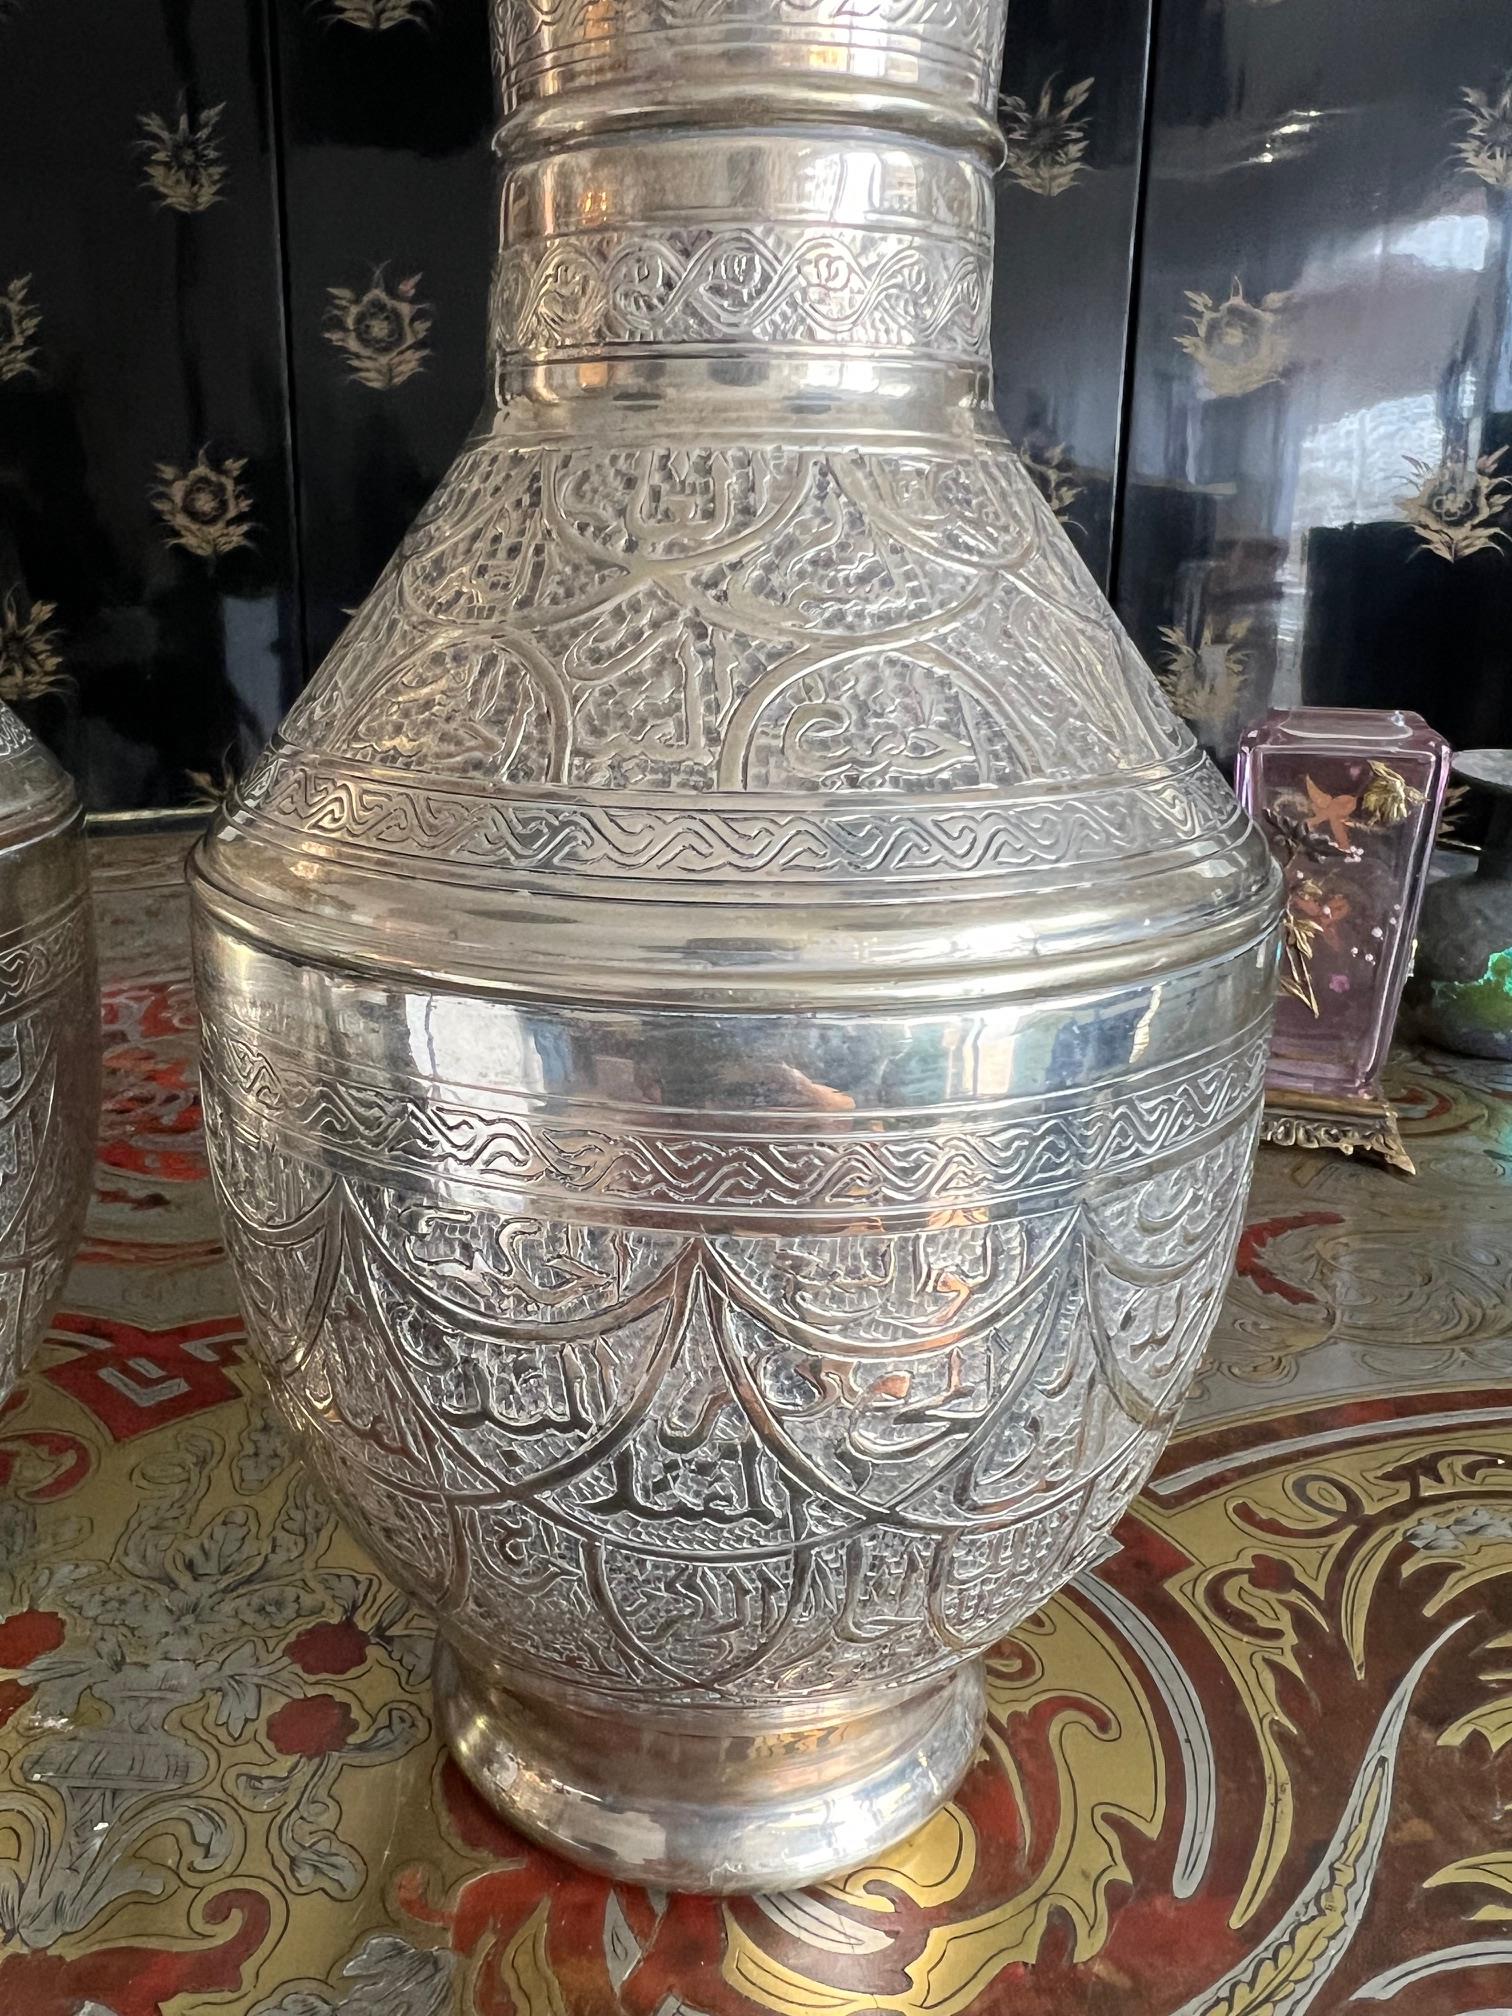 A PAIR OF SILVER ISLAMIC CALLIGRAPHIC VASES - Image 8 of 9